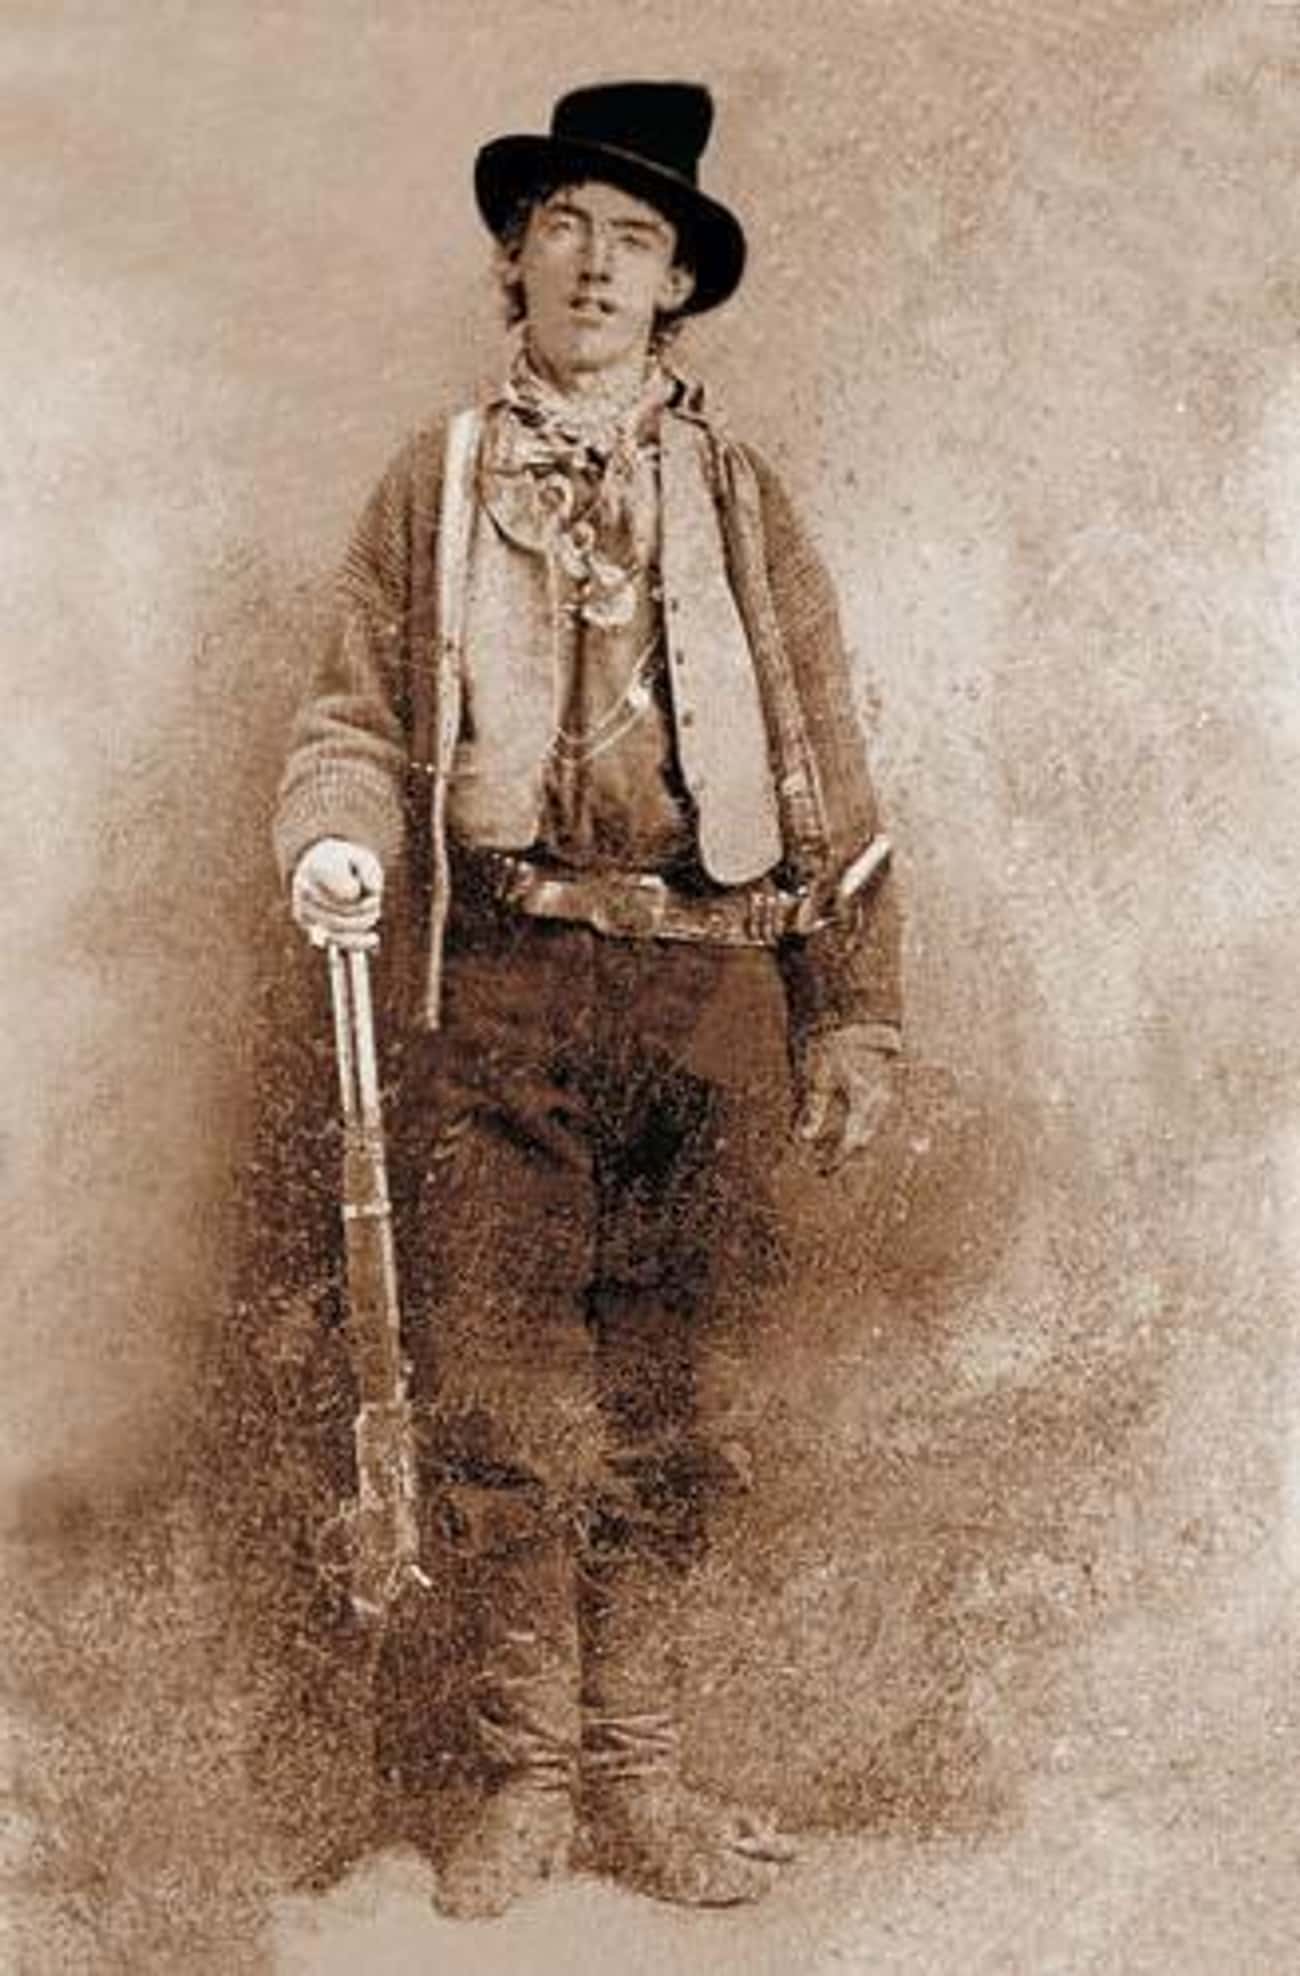 On His Way To The Gallows, Billy the Kid Asked To Use The Outhouse, Overcame His Captor, And Rode Out Of Town